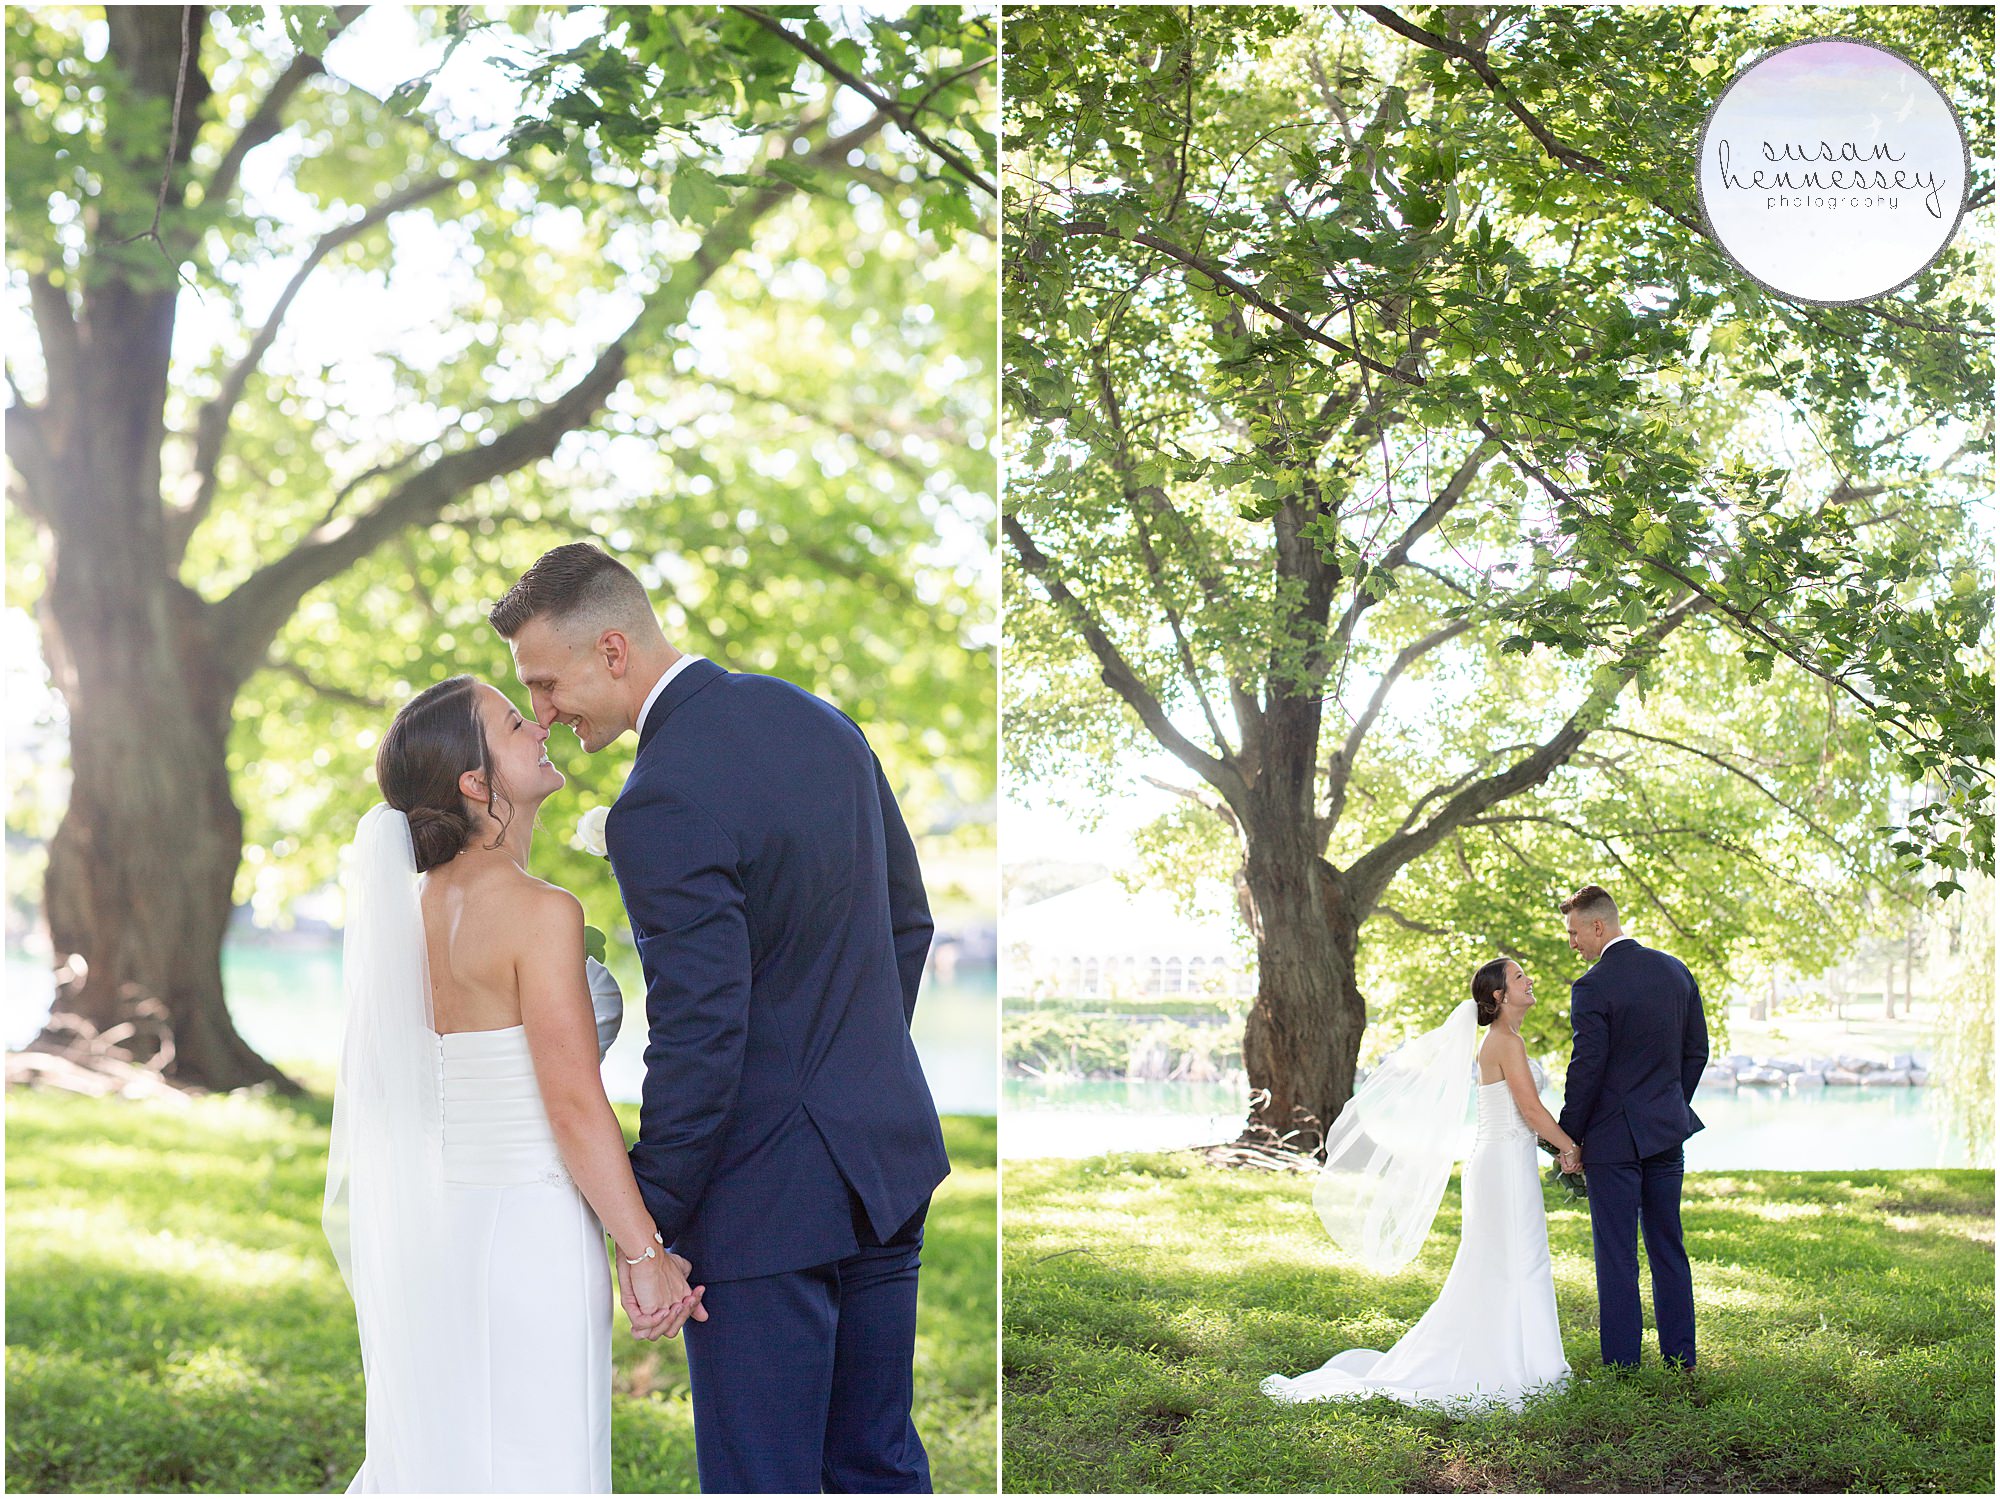 A bride and groom at their romantic lake wedding in central New Jersey